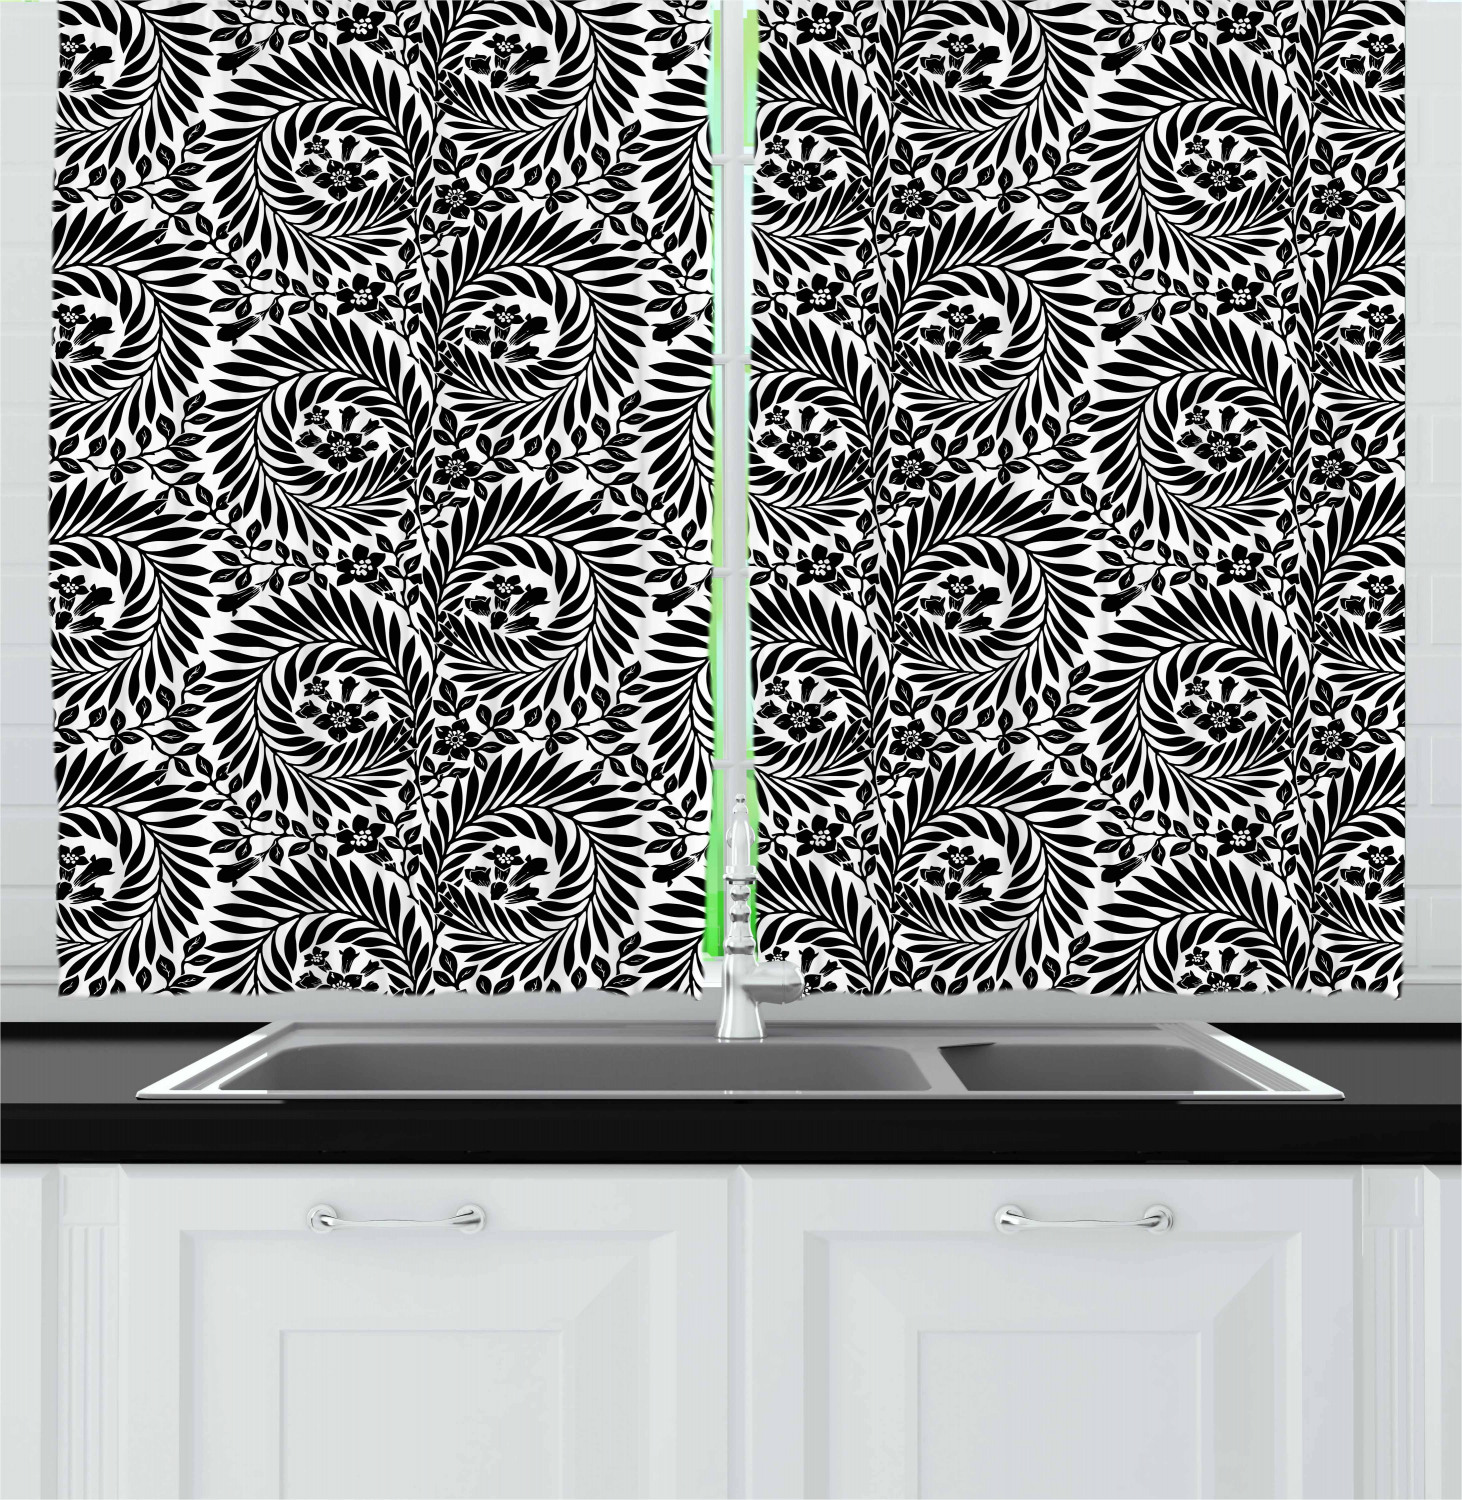 Beer and Ale Barrel Kitchen Curtains 2 Panel Set Decor Window Drapes 55 X 39" 